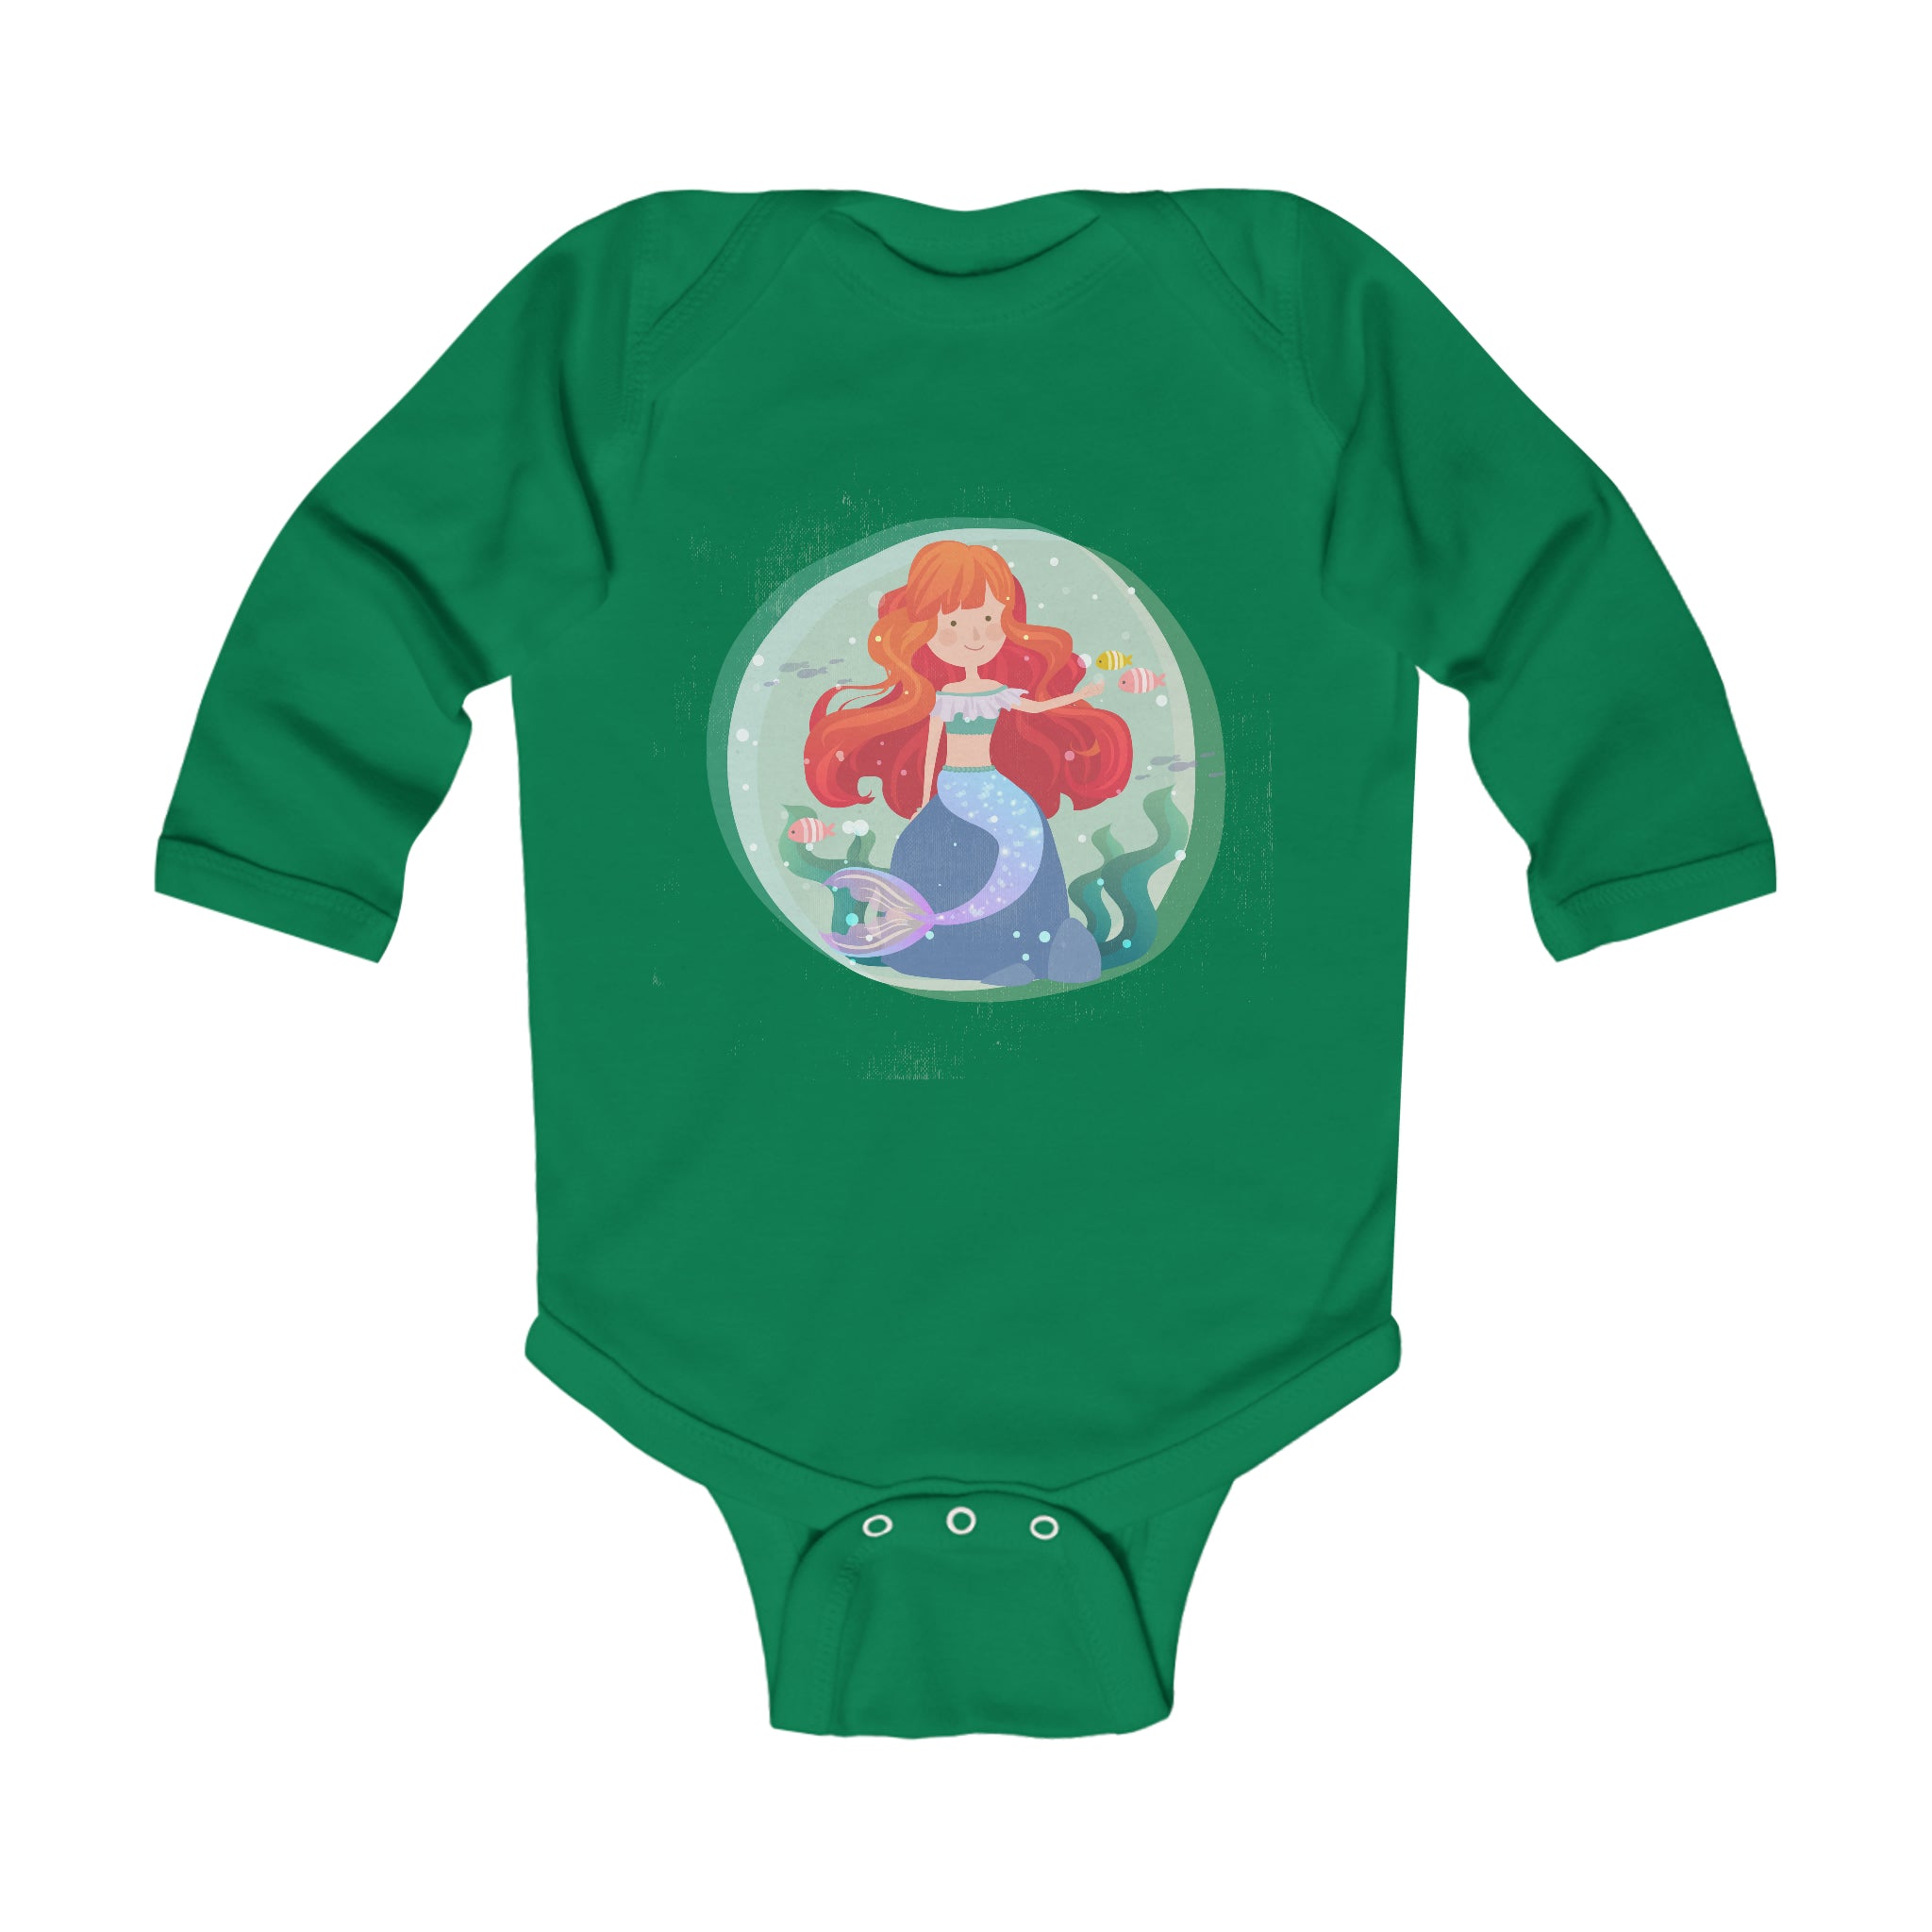 Baby Clothes, Infant Clothing, Long Sleeve Onesies Baby Essentials, New Baby Gift Ideas, Baby Girl Gifts